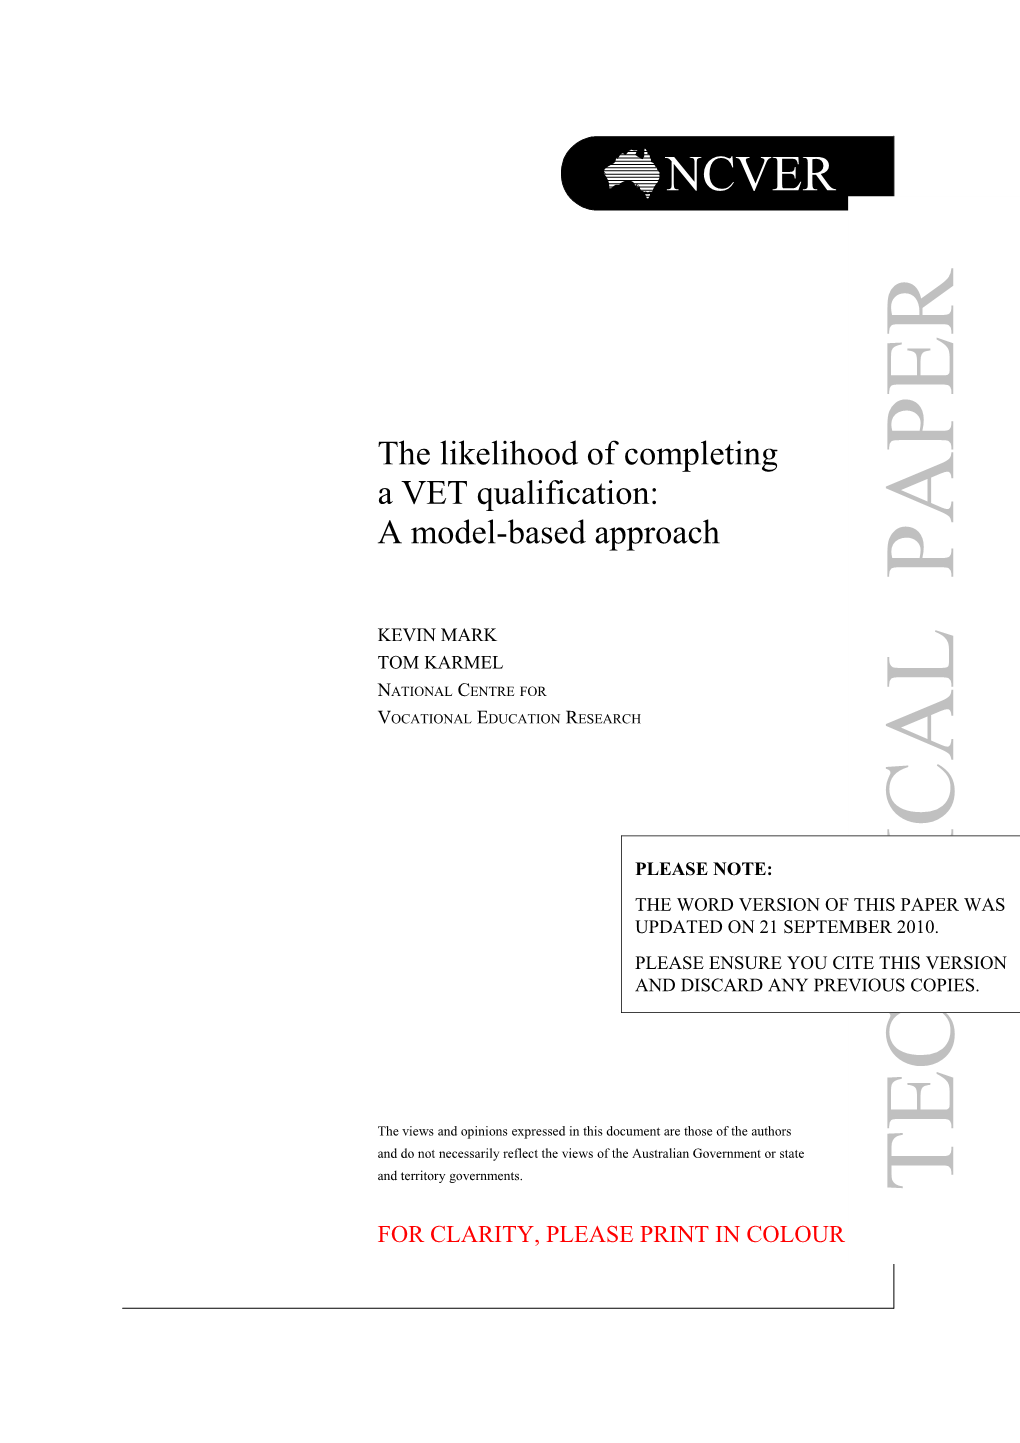 The Likelihood of Completing Avet Qualification: a Model-Based Approach